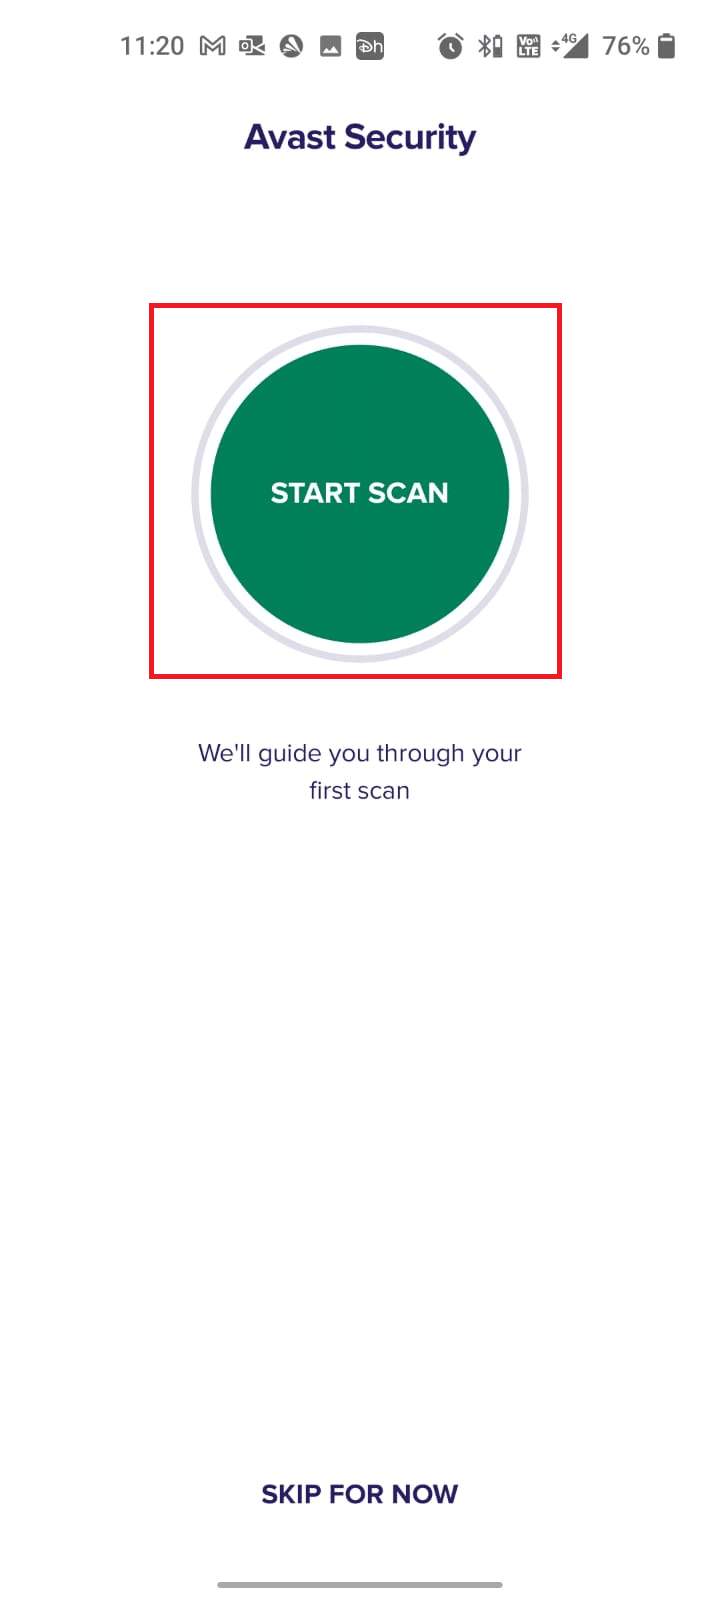 tap START SCAN. Fix WhatsApp Stopped Working Today on Android